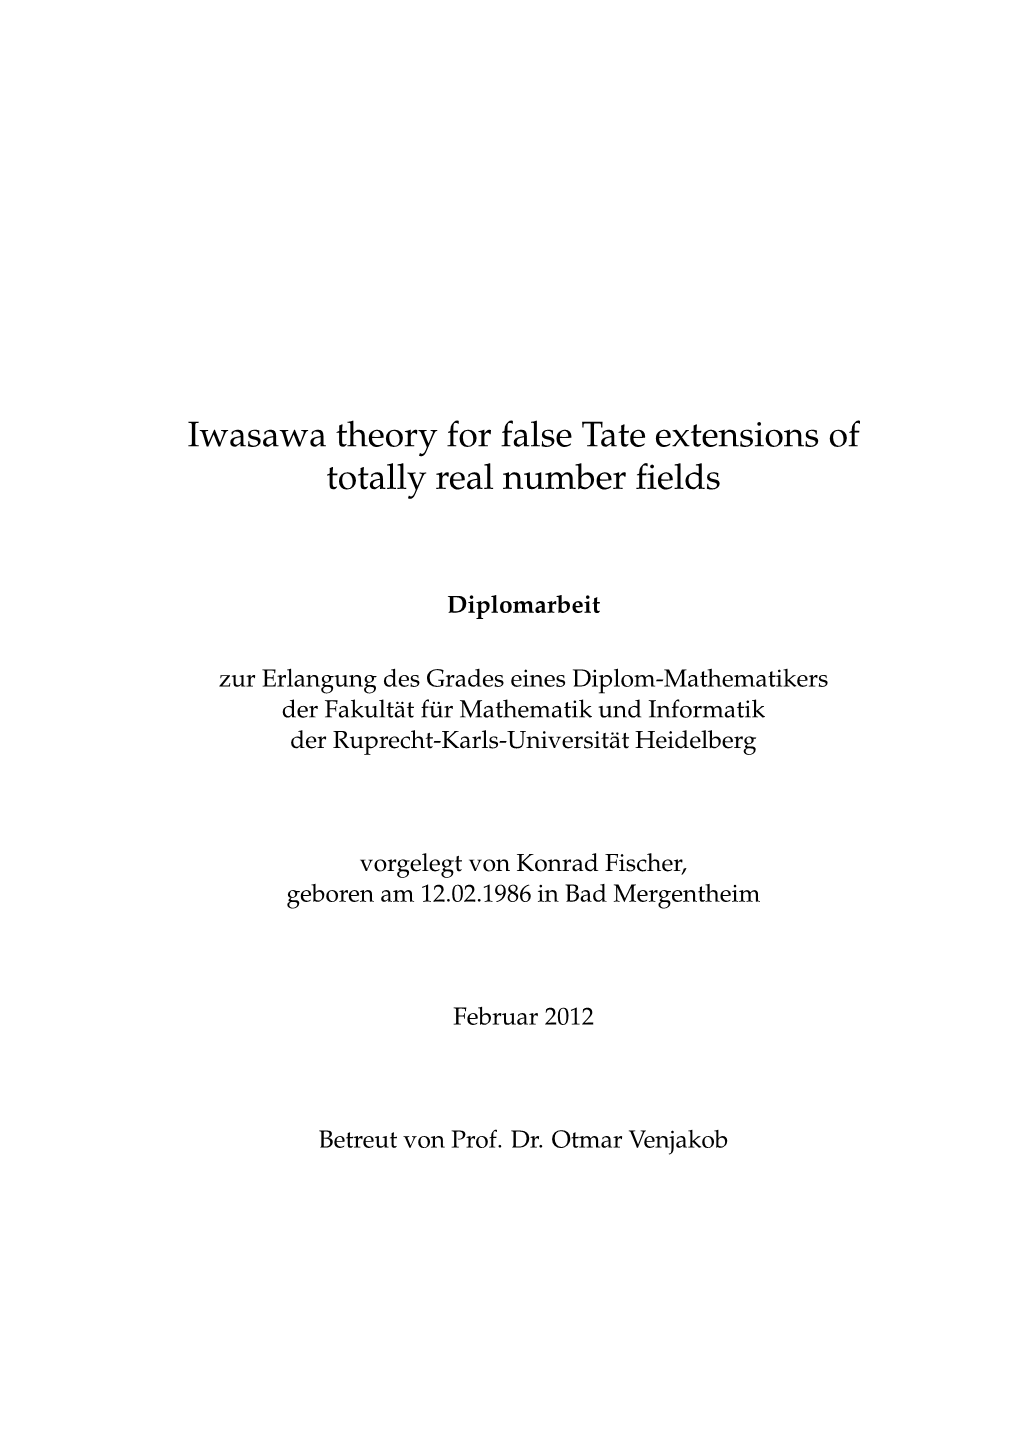 Iwasawa Theory for False Tate Extensions of Totally Real Number ﬁelds